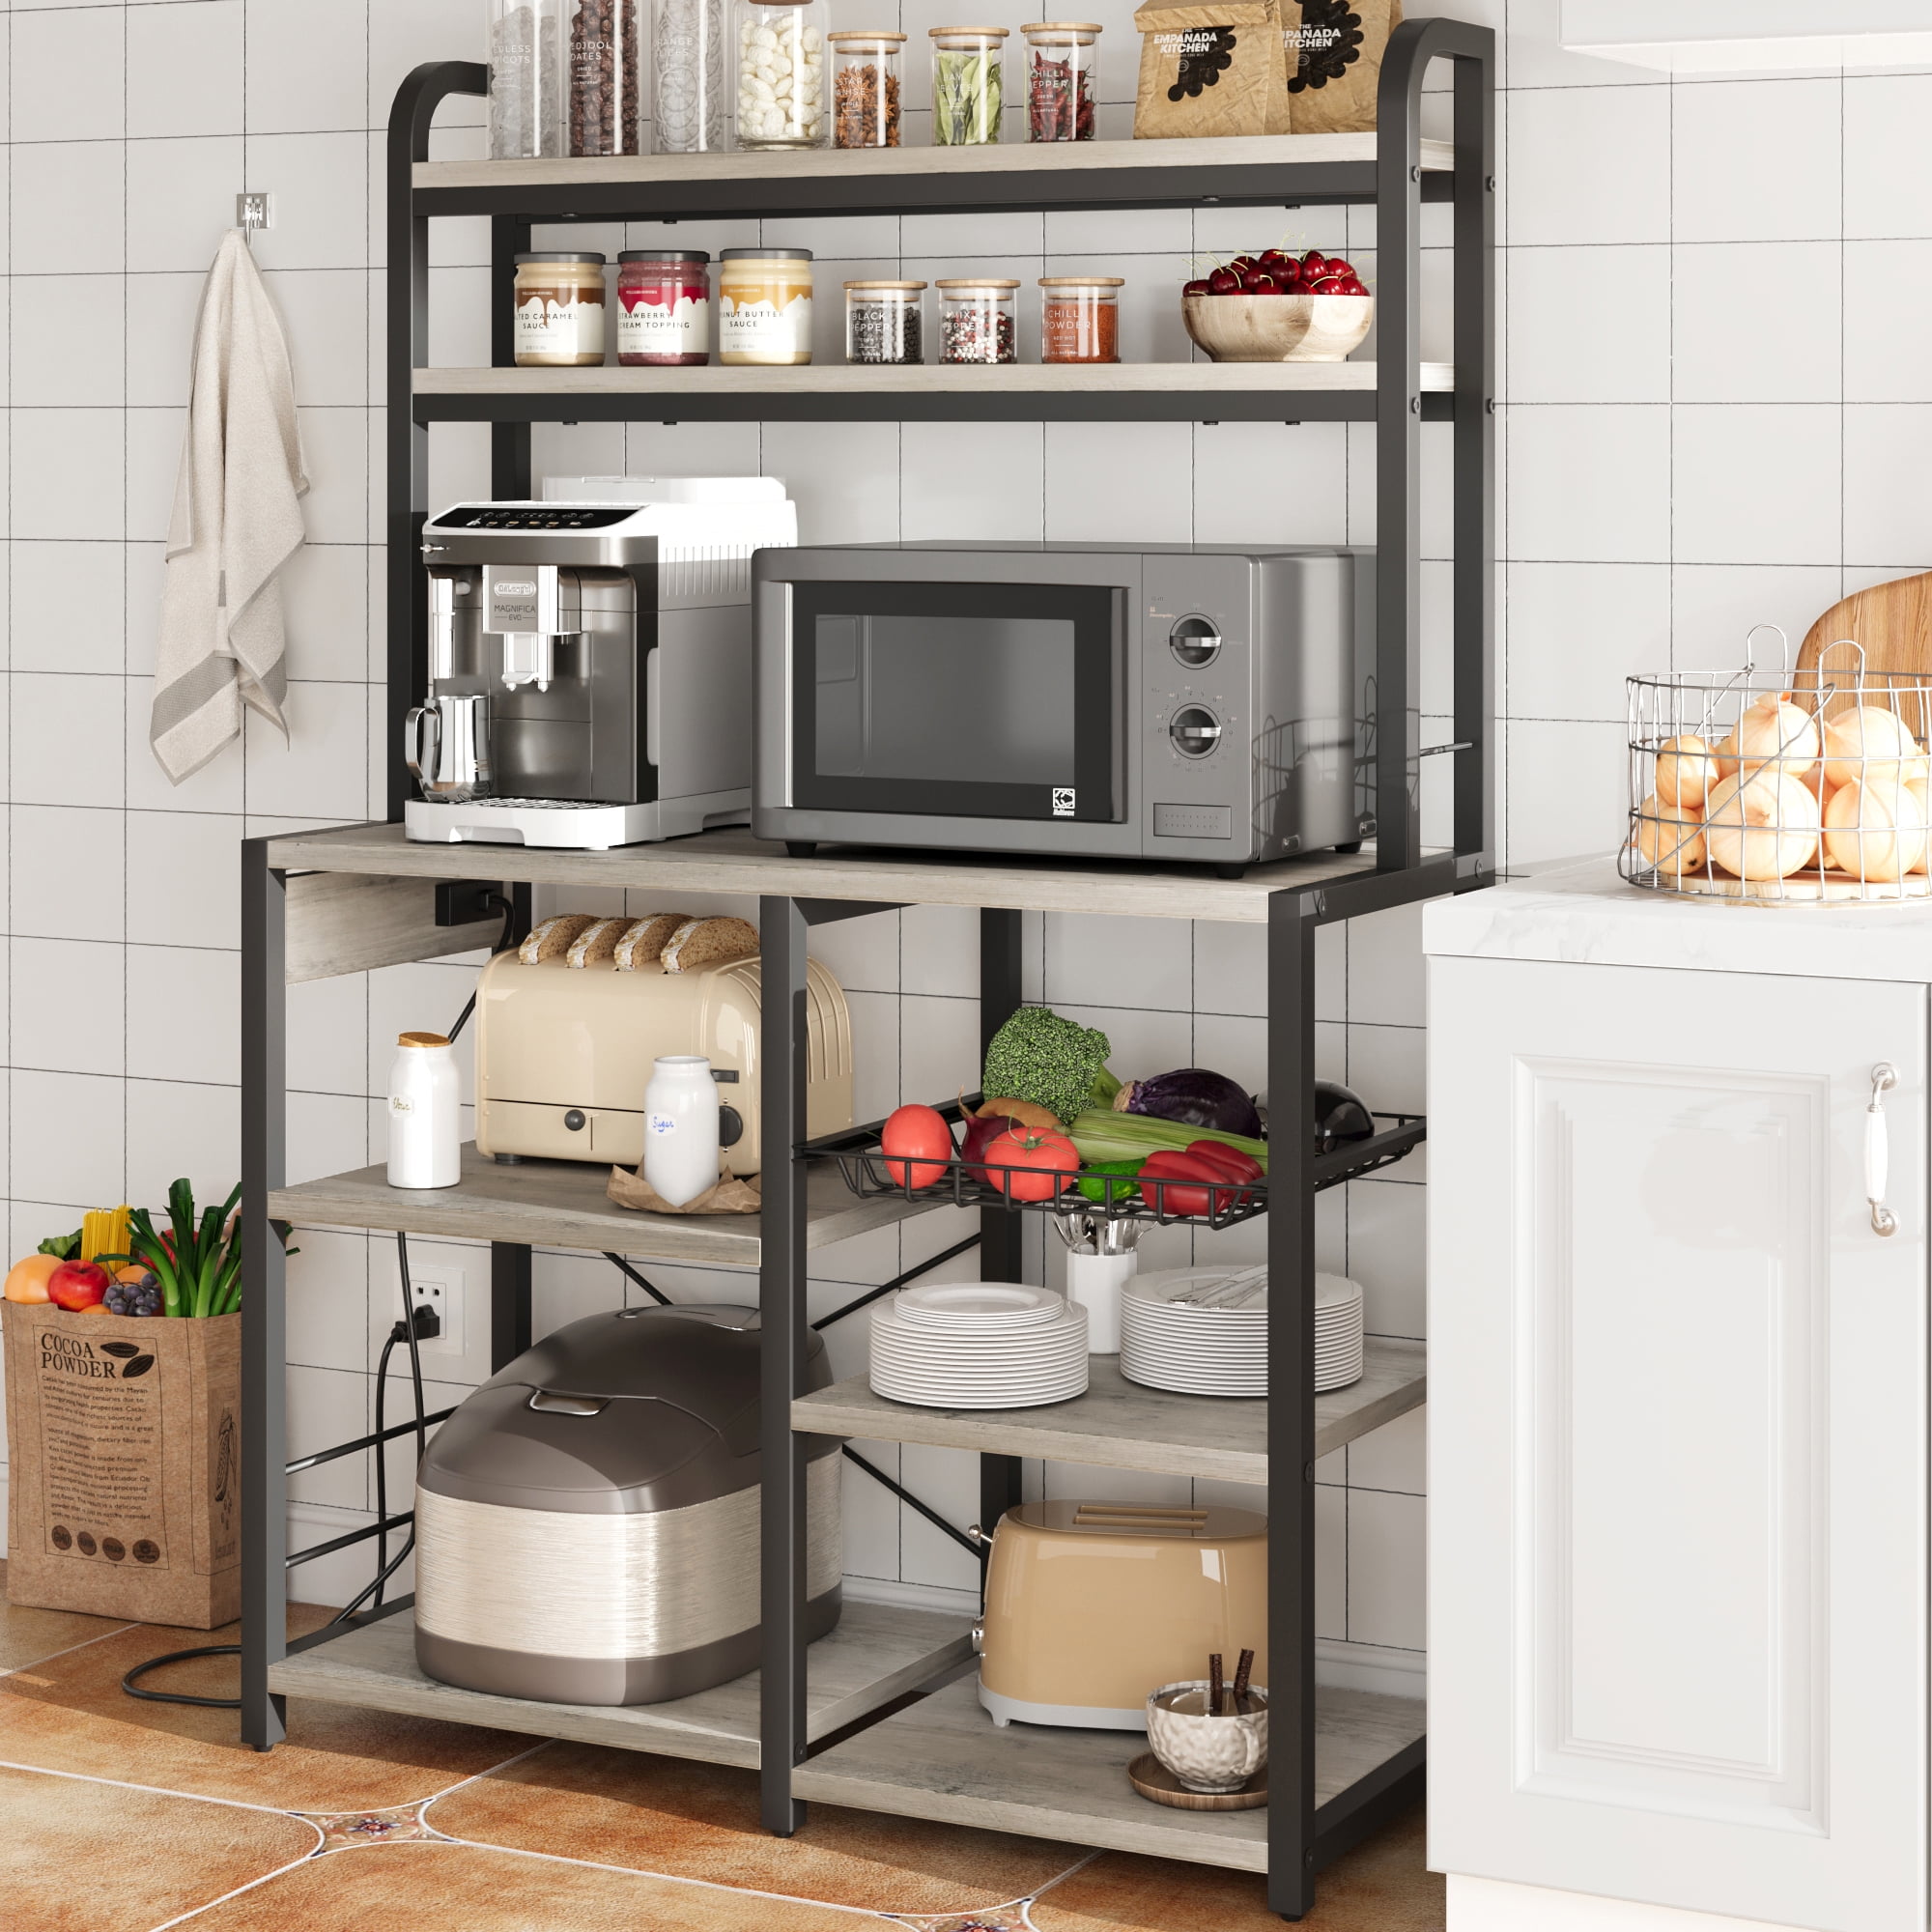 EnHomee 6 Tier Kitchen Bakers Rack Microwave Oven Stand with Storage Coffee  Bar with Shelves Cabinet Hooks, 29.5 W * 13.9 D * 63 H Rustic Brown